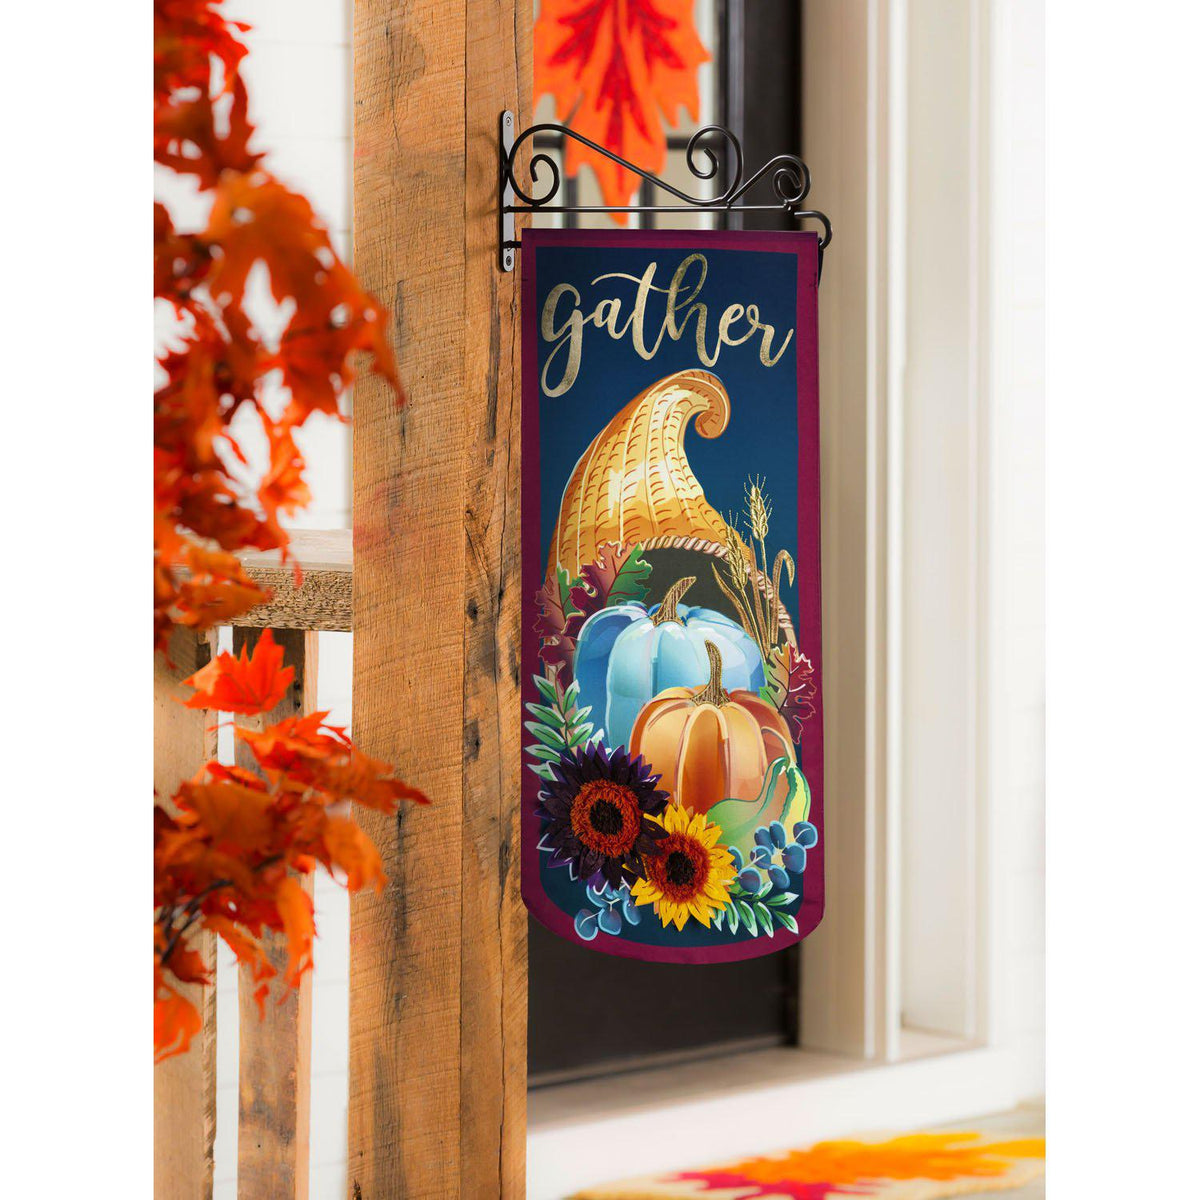 The  Cornucopia Gather Textile Decor from the Everlasting Impressions collection features a cornucopia spilling out pumpkins and flowers and the word "Gather". 